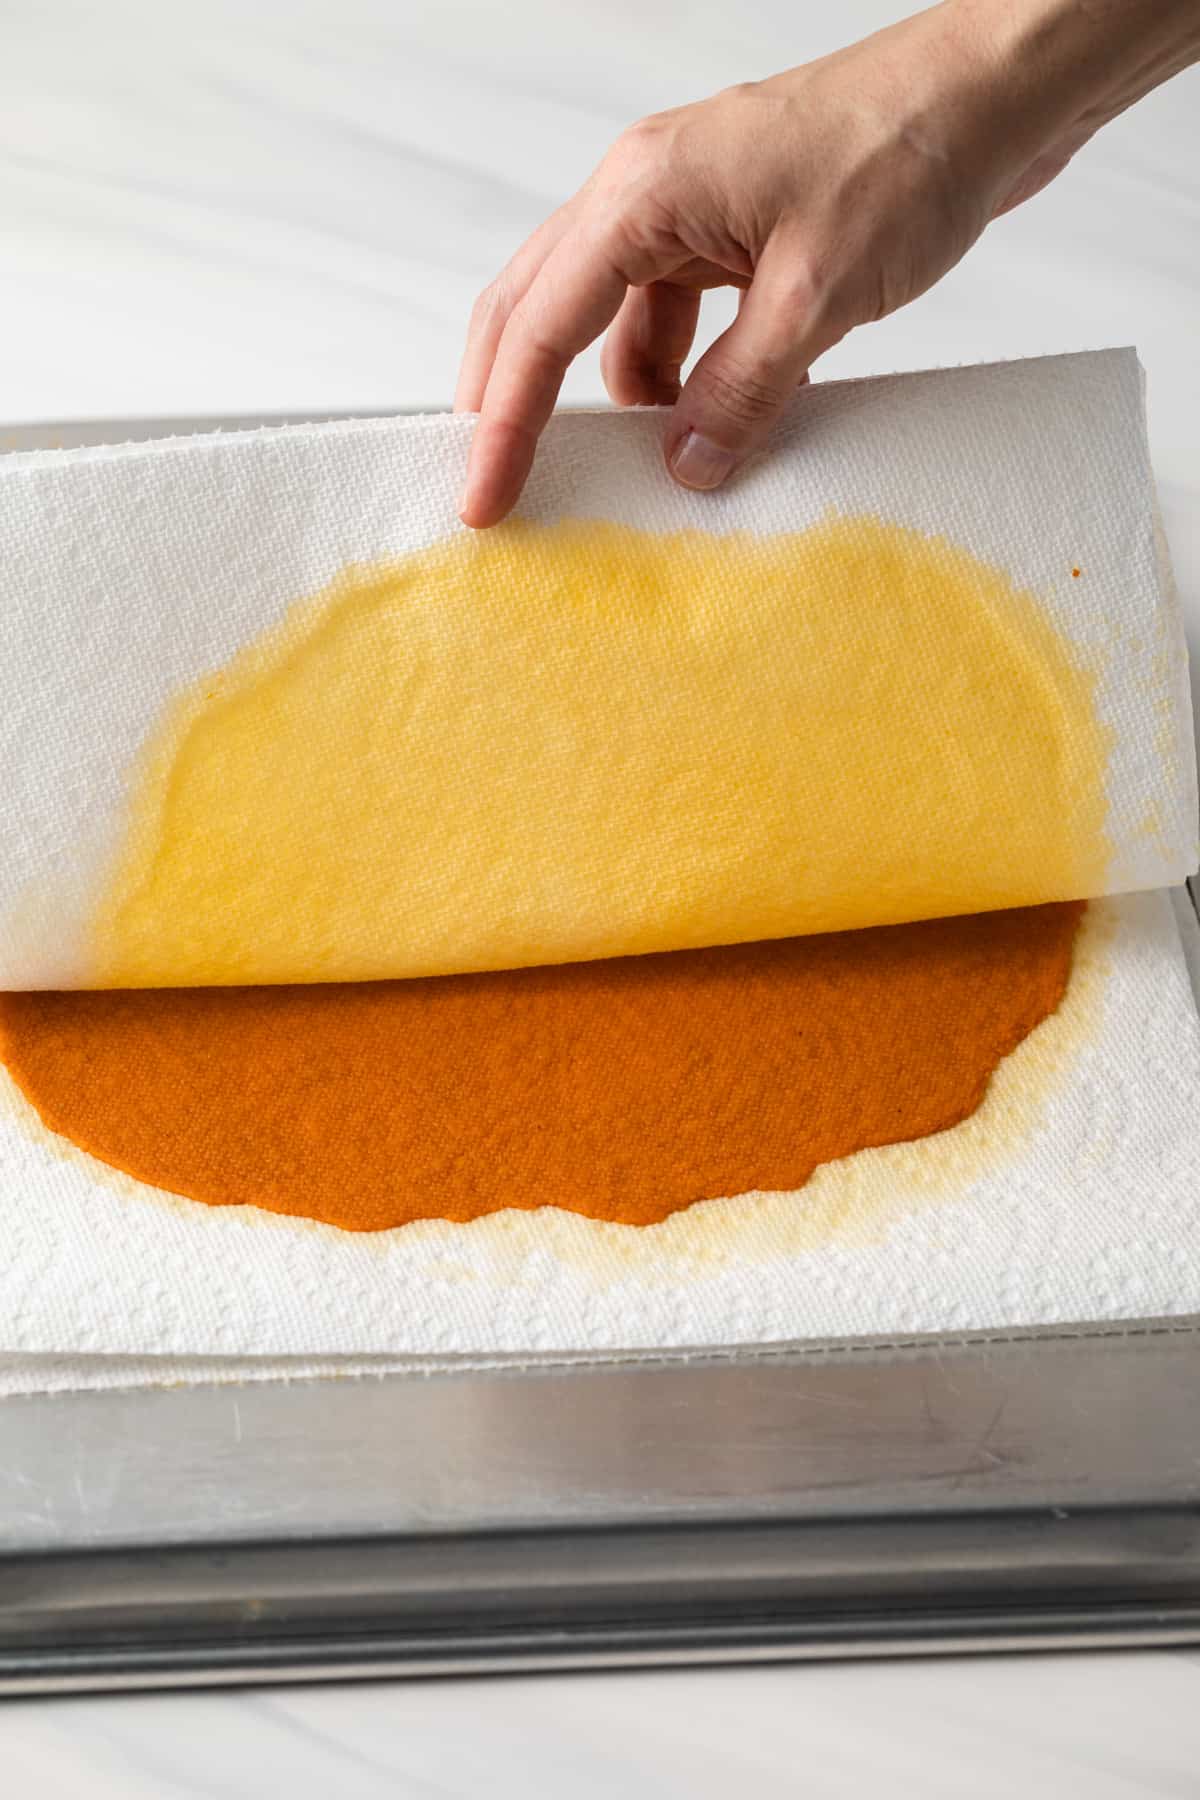 Paper towels being pulled away from pumpkin puree